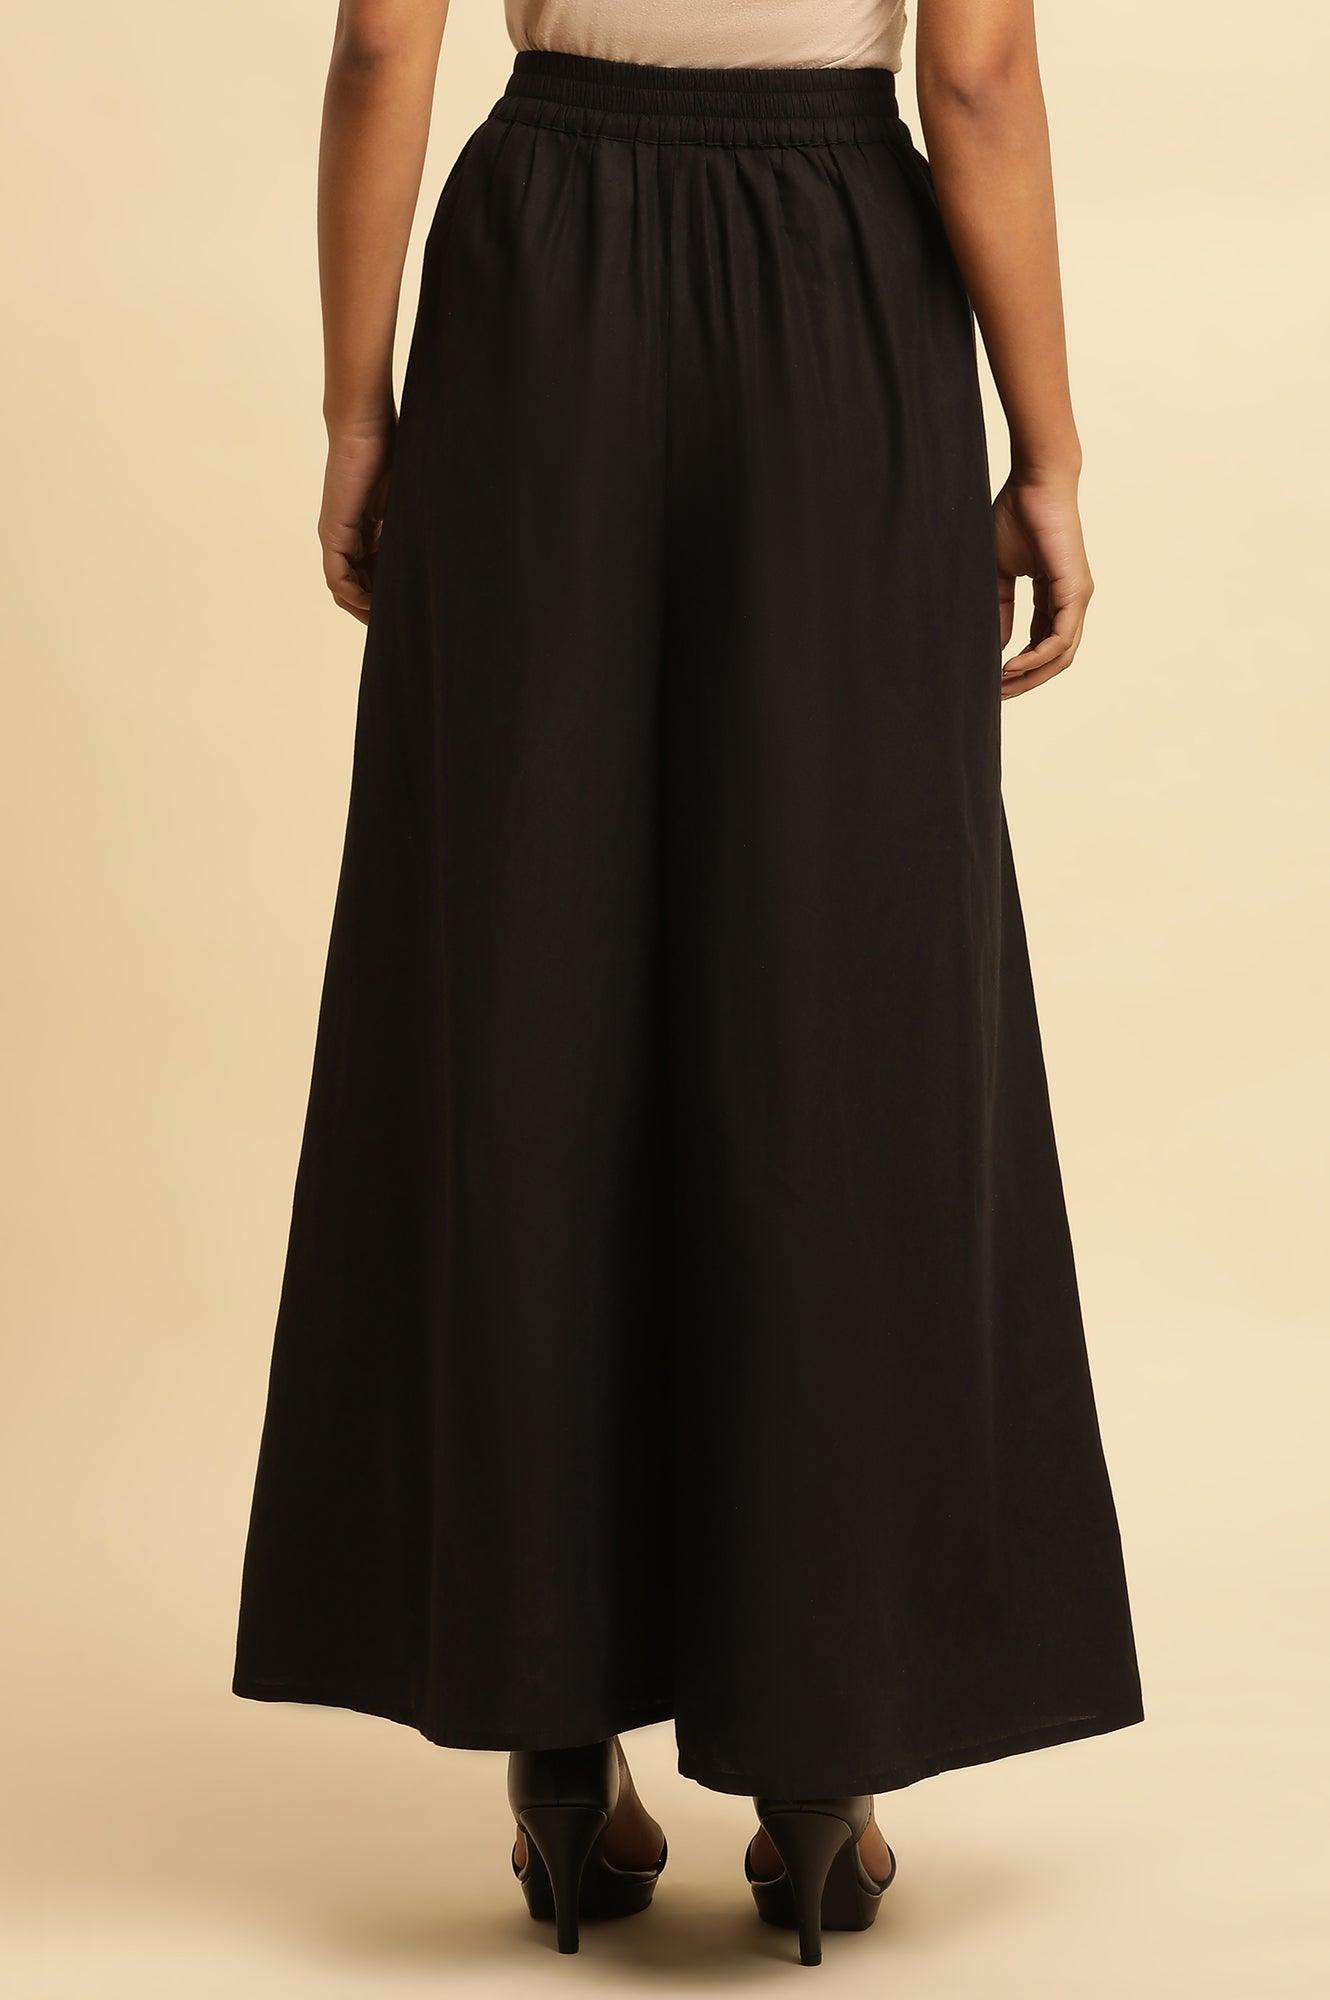 Jet Black Flared Culottes With Mirror Work - wforwoman